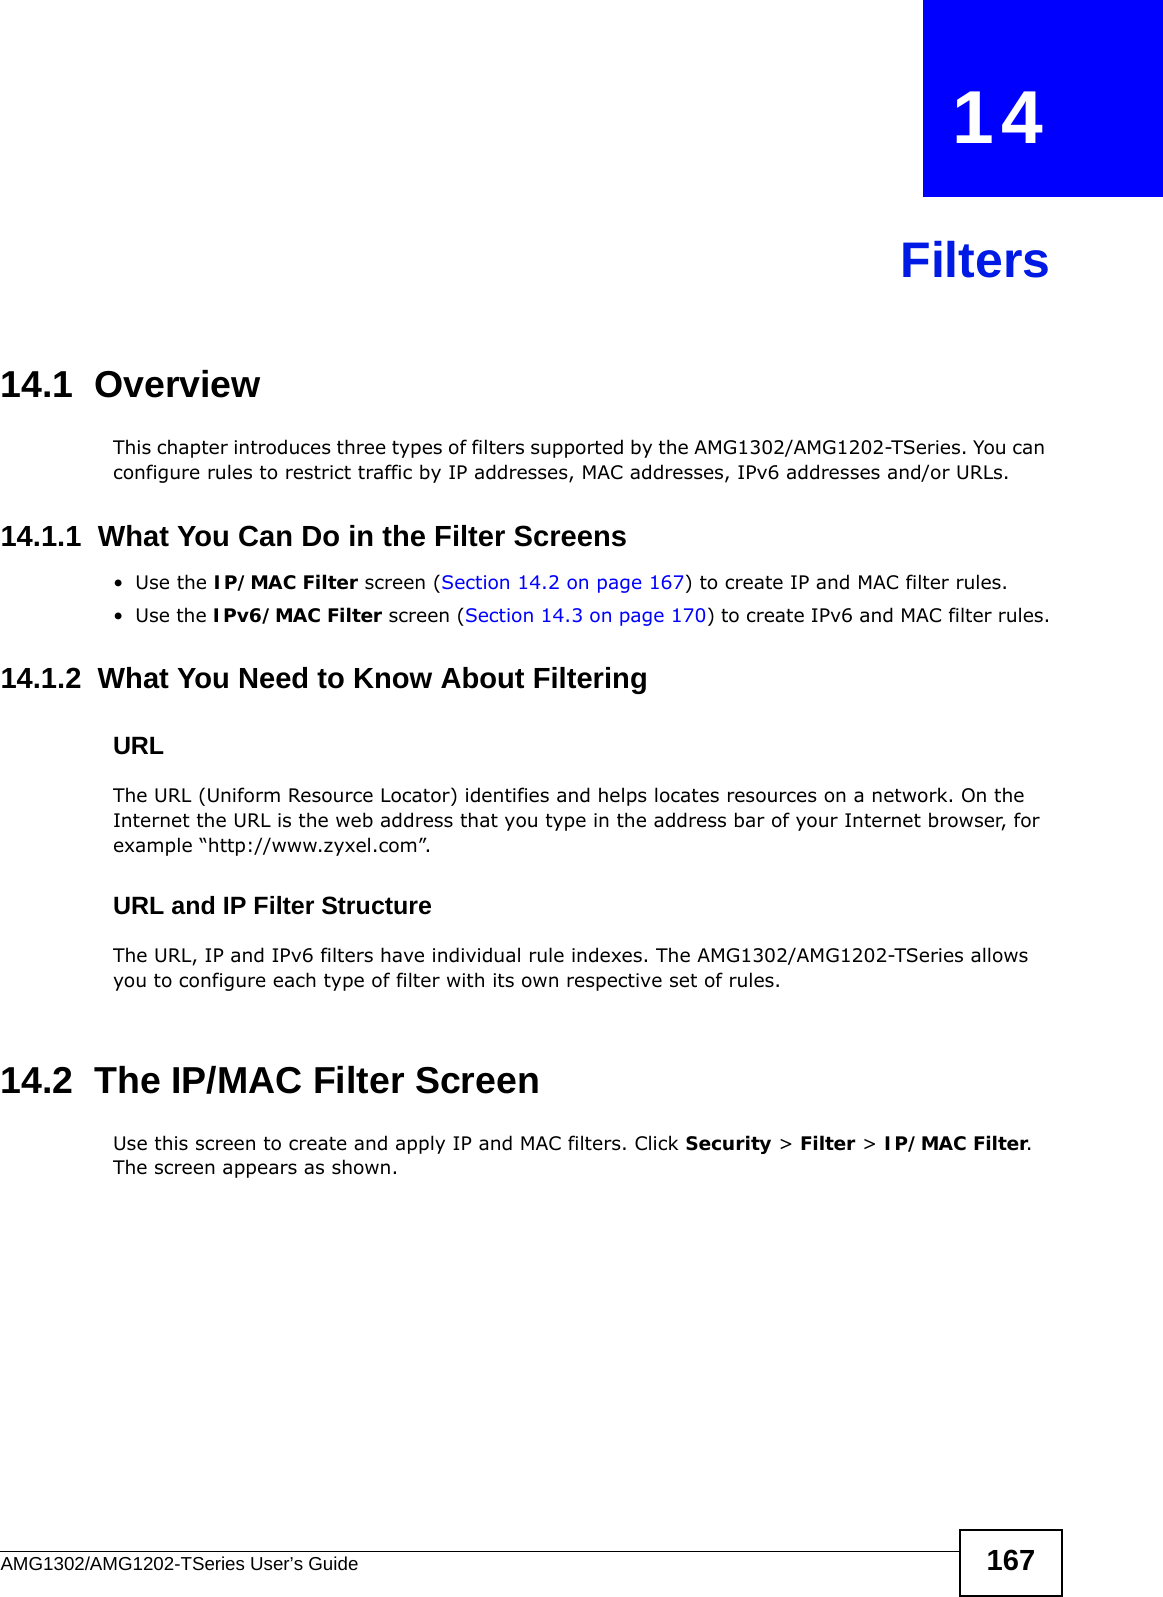 AMG1302/AMG1202-TSeries User’s Guide 167CHAPTER   14Filters14.1  Overview This chapter introduces three types of filters supported by the AMG1302/AMG1202-TSeries. You can configure rules to restrict traffic by IP addresses, MAC addresses, IPv6 addresses and/or URLs.14.1.1  What You Can Do in the Filter Screens•Use the IP/MAC Filter screen (Section 14.2 on page 167) to create IP and MAC filter rules.•Use the IPv6/MAC Filter screen (Section 14.3 on page 170) to create IPv6 and MAC filter rules.14.1.2  What You Need to Know About FilteringURLThe URL (Uniform Resource Locator) identifies and helps locates resources on a network. On the Internet the URL is the web address that you type in the address bar of your Internet browser, for example “http://www.zyxel.com”.URL and IP Filter StructureThe URL, IP and IPv6 filters have individual rule indexes. The AMG1302/AMG1202-TSeries allows you to configure each type of filter with its own respective set of rules. 14.2  The IP/MAC Filter ScreenUse this screen to create and apply IP and MAC filters. Click Security &gt; Filter &gt; IP/MAC Filter. The screen appears as shown.